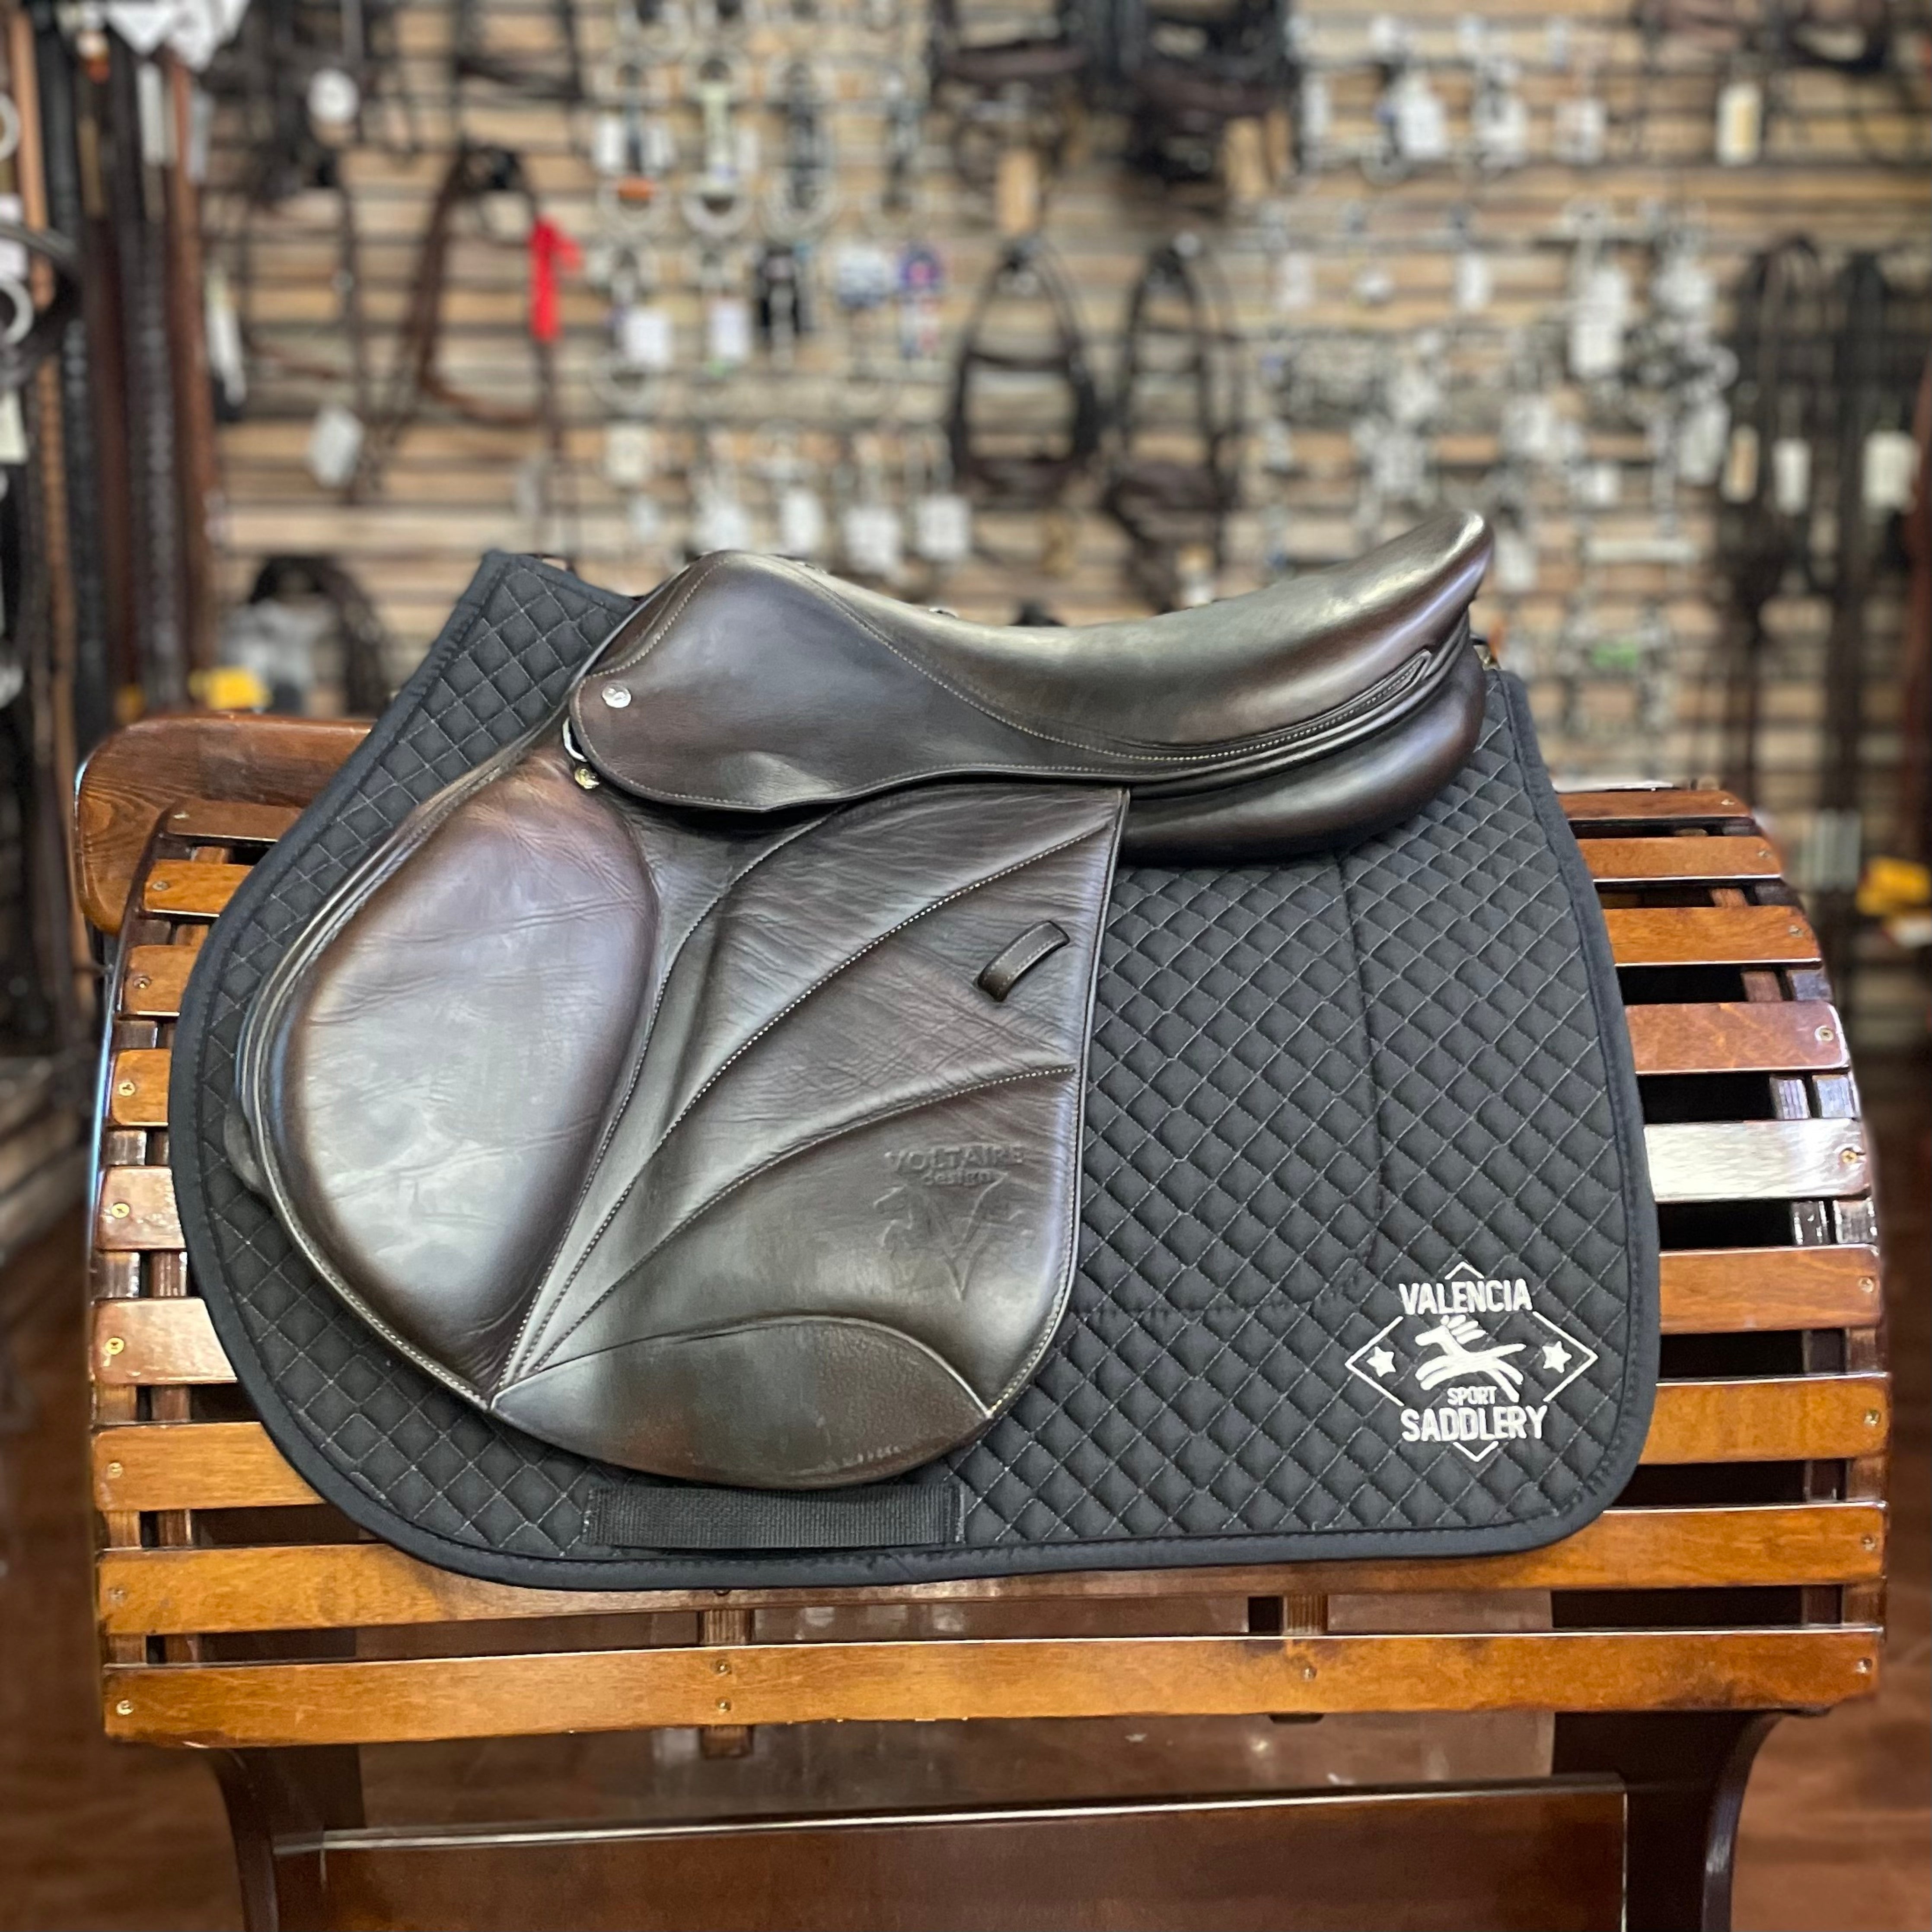 Voltaire Blue Wing saddle 17.5" 2AA